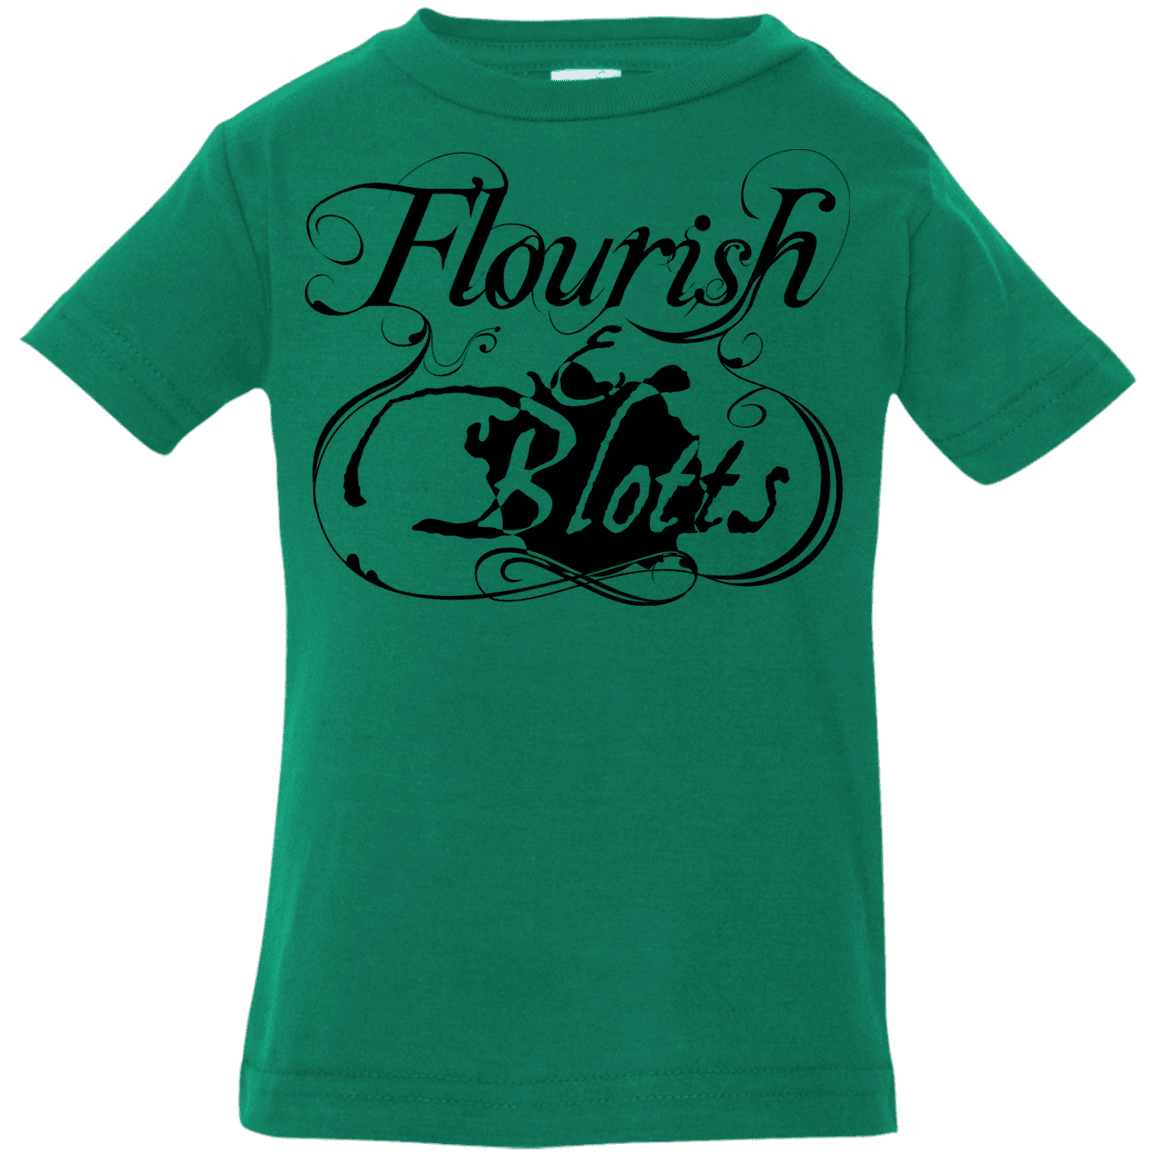 T-Shirts Kelly / 6 Months Flourish and Blotts of Diagon Alley Infant Premium T-Shirt